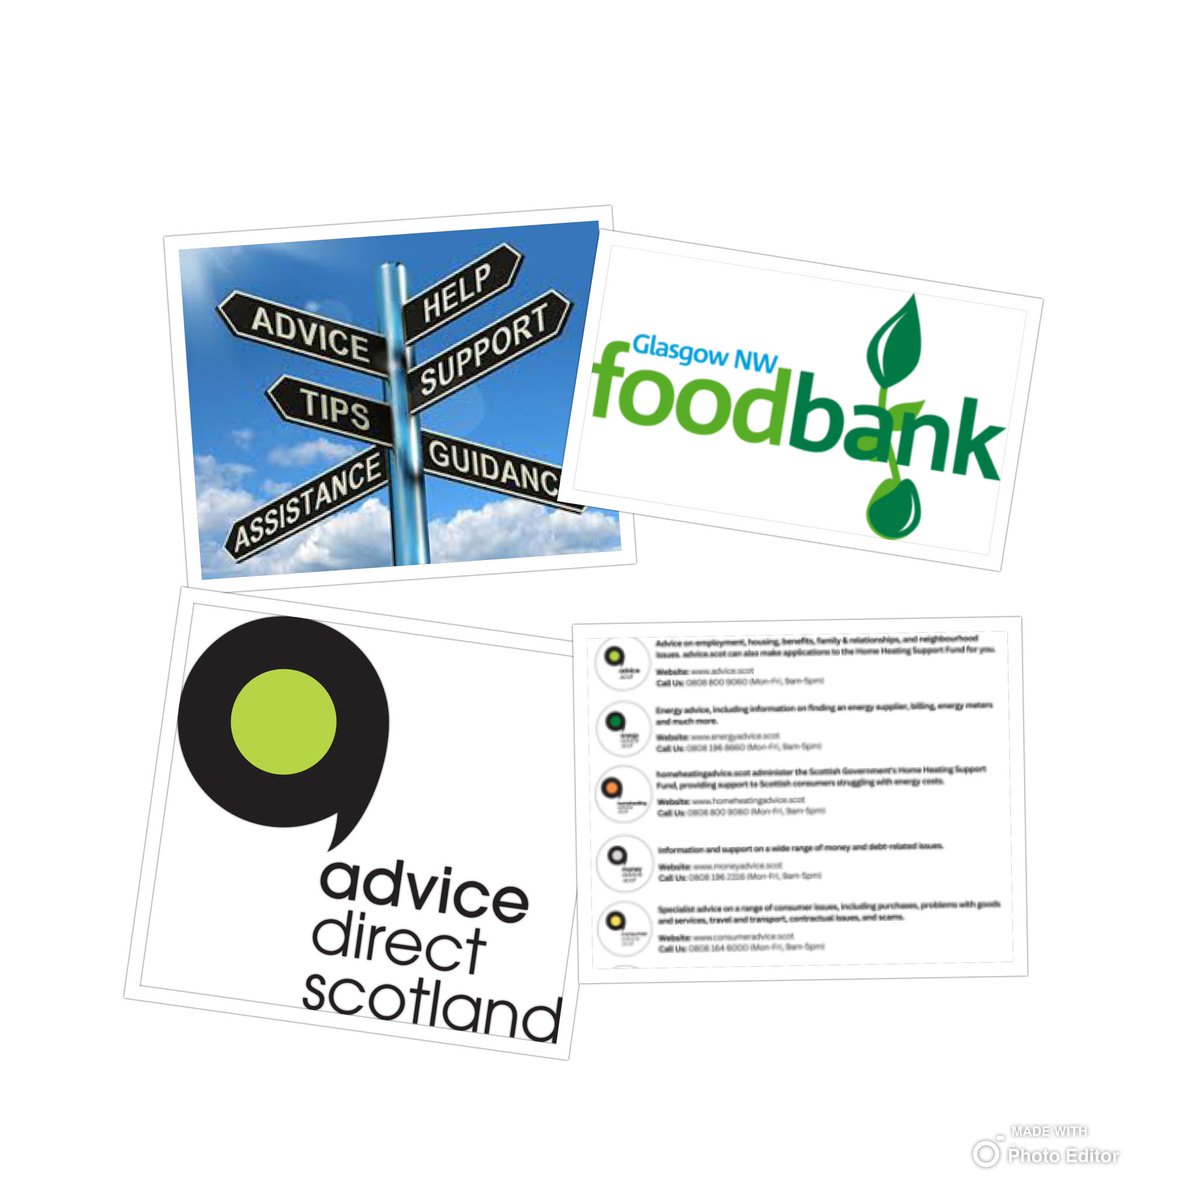 Glasgow North West Foodbank will be working in partnership with Advice Direct Scotland to offer advice and support on a wide range of issues. Advisors will be on site at our 2 Foodbanks on Thursday 03/08/23 at Victory Family Centre Glasgow and on Friday 04/08/23 at Blawarthill